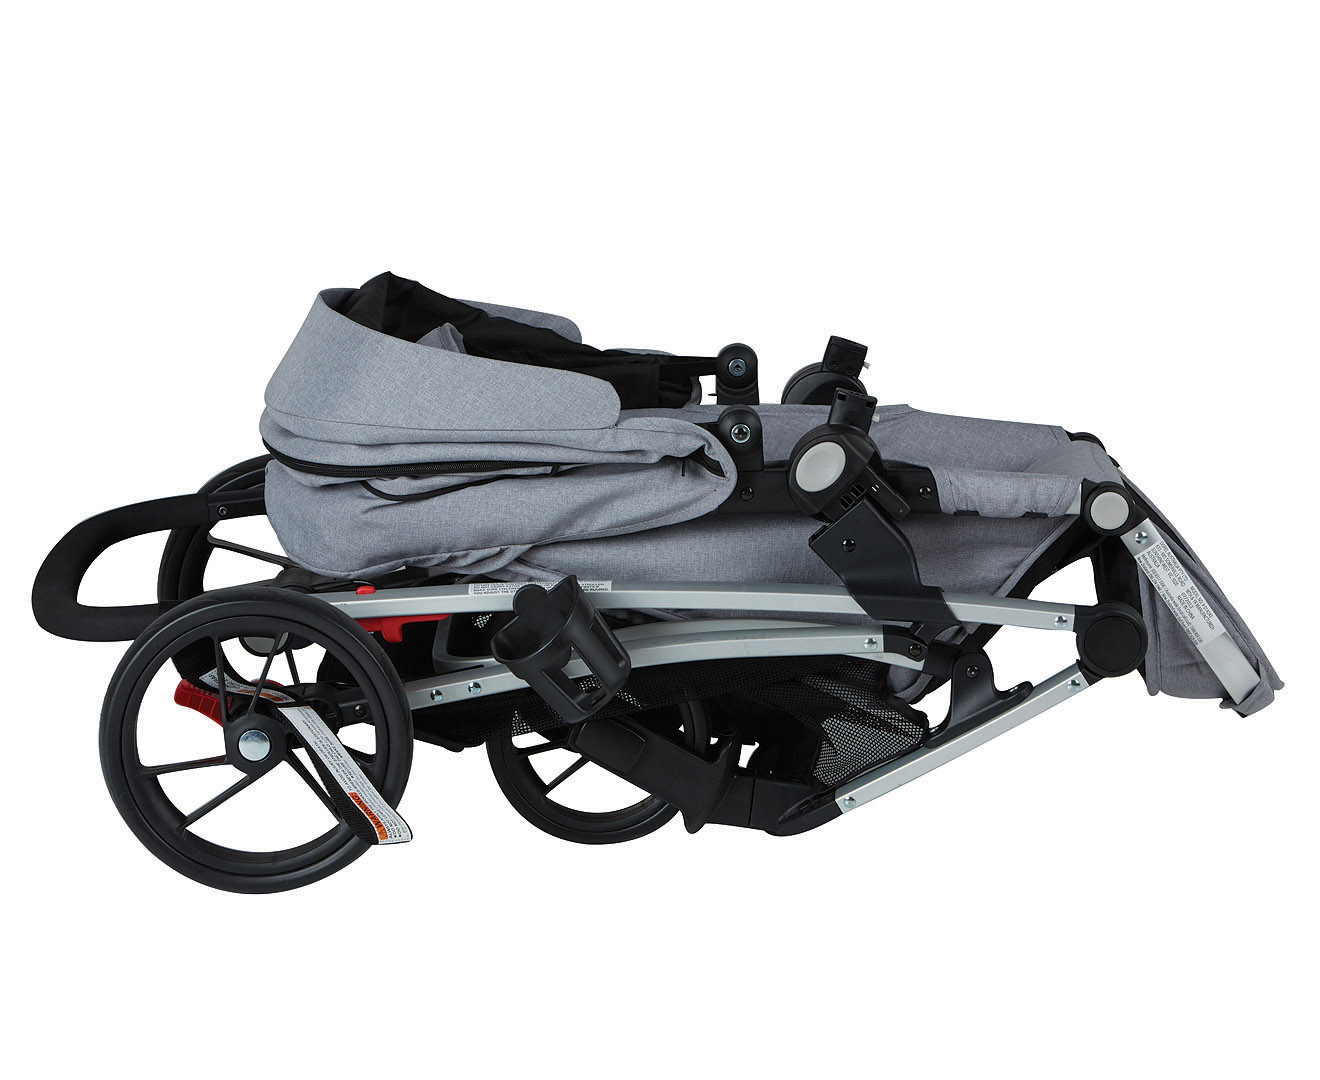 mother's choice grace 4 wheel stroller review